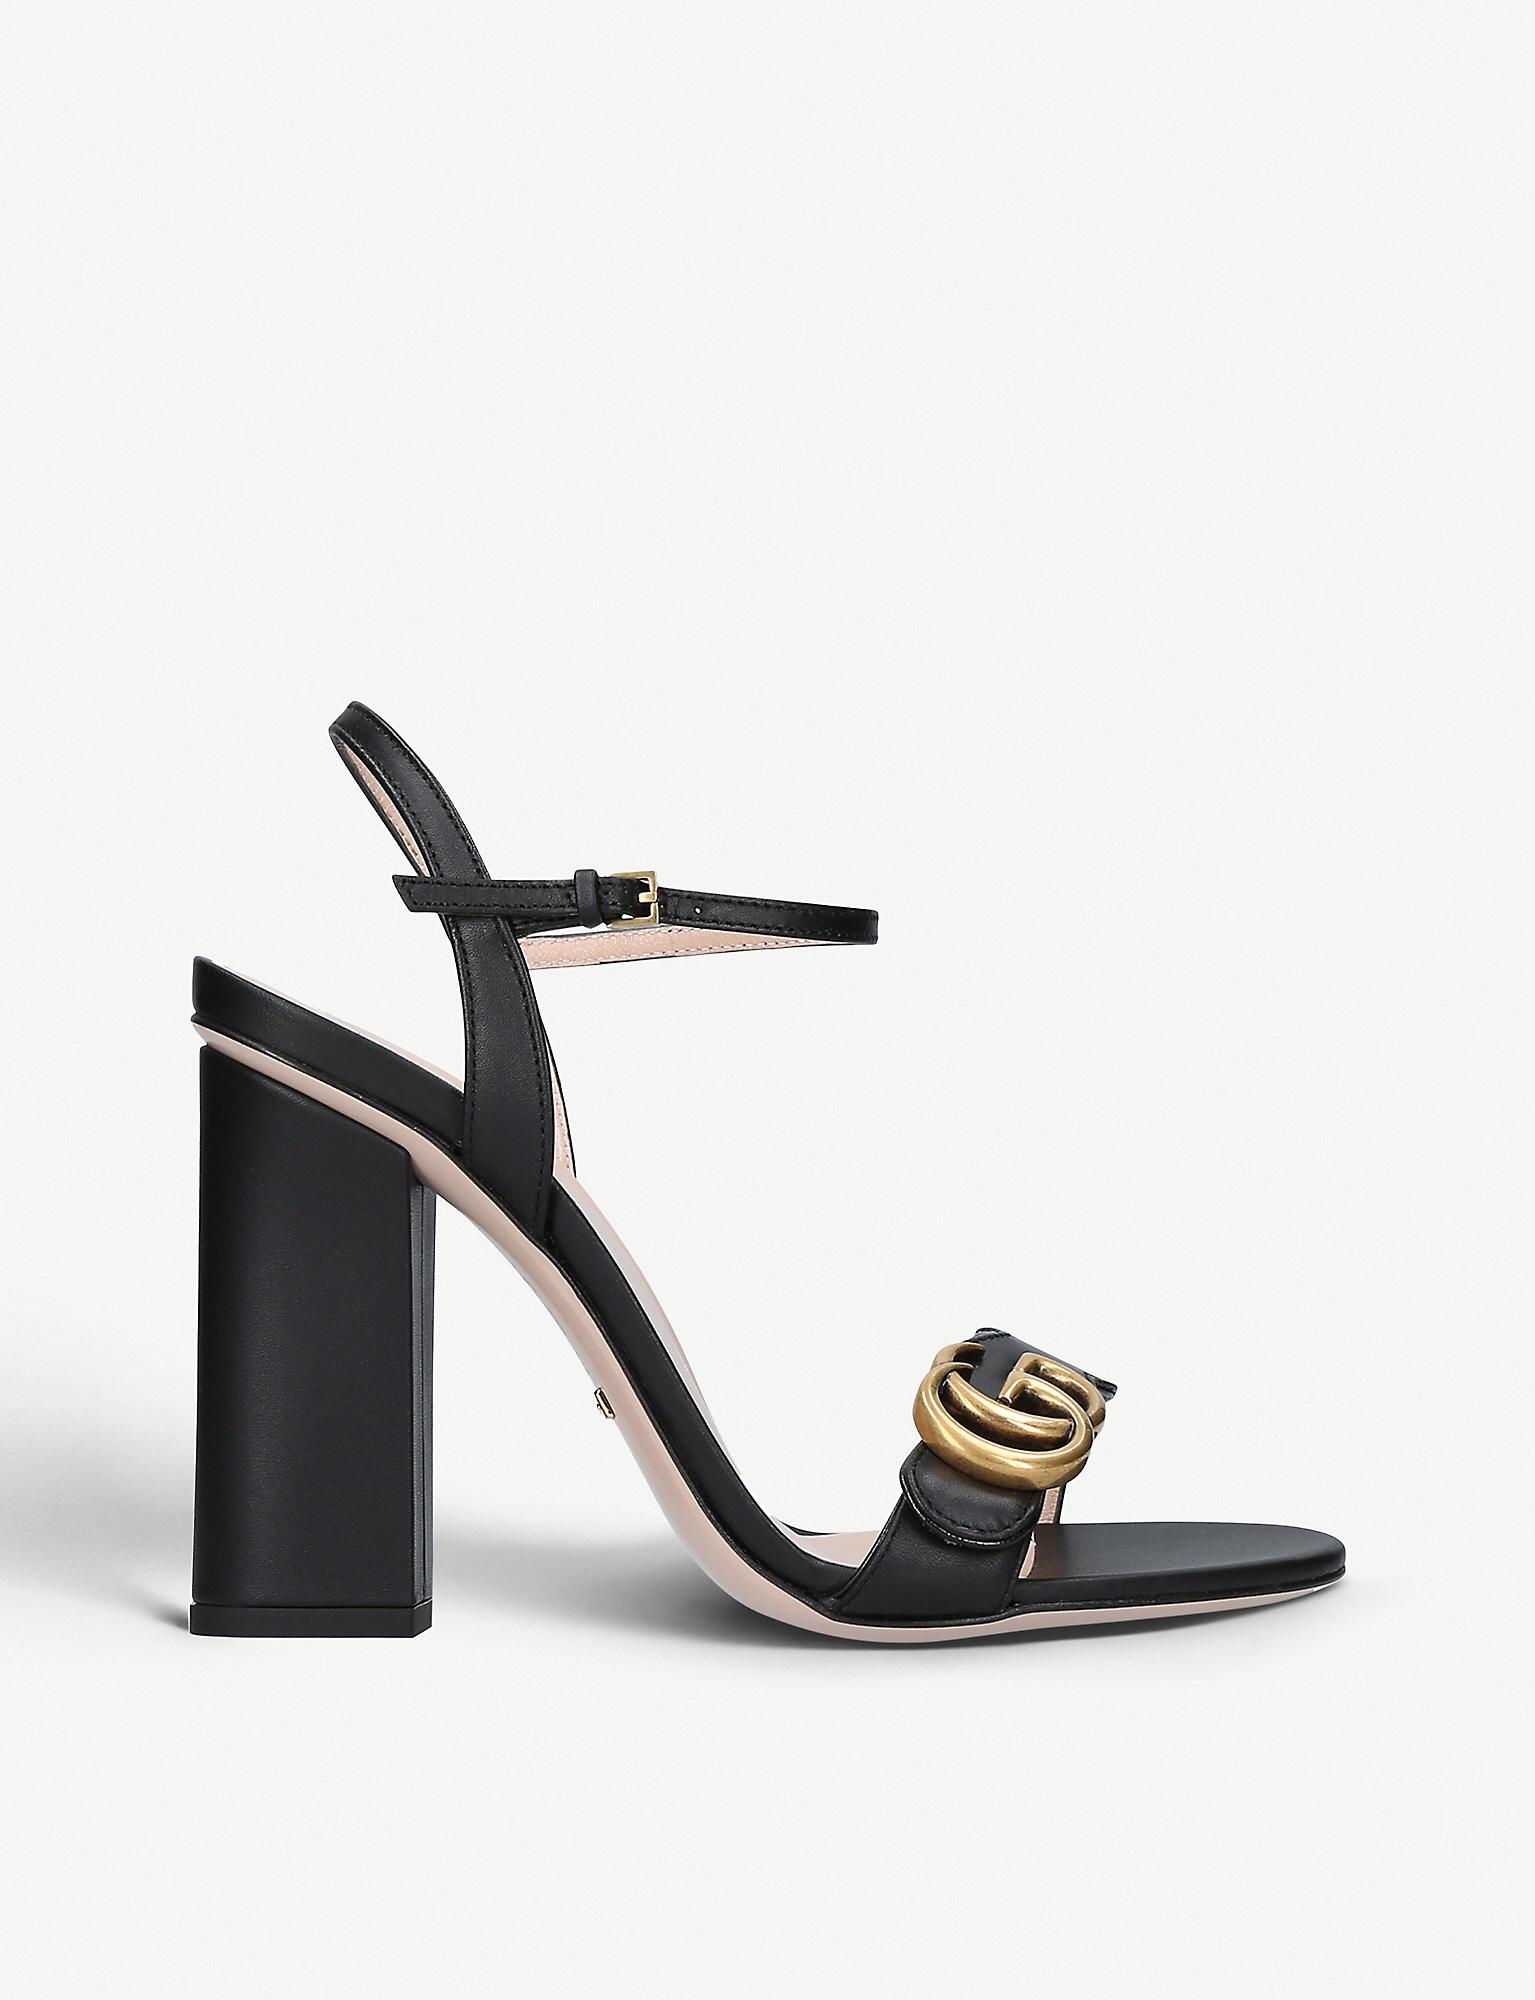 Gucci Leather Marmont Sandals 105 in Black - Lyst